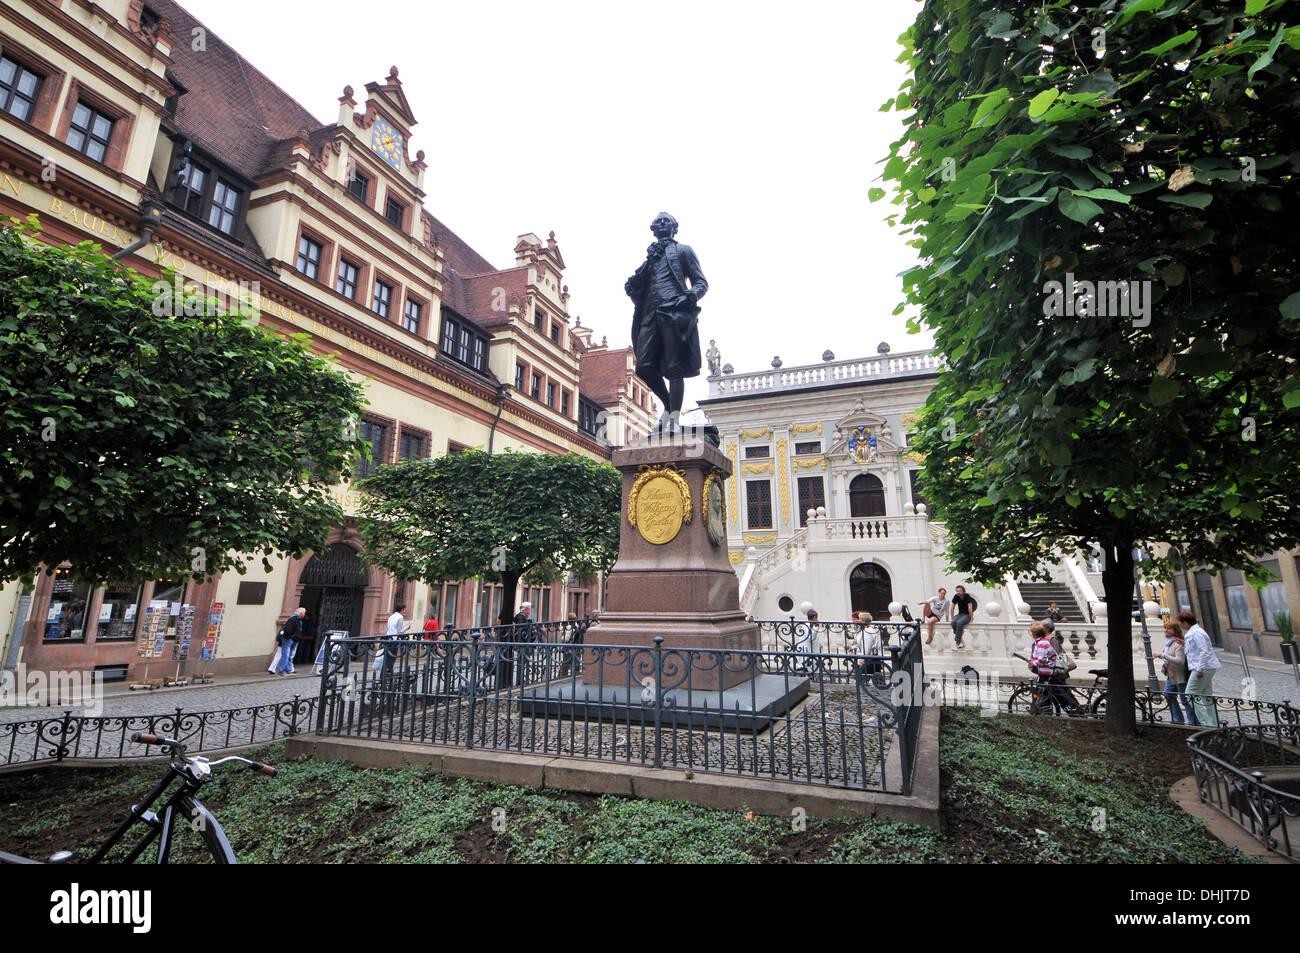 Goethe monument and old stock exchange at the old town, Leipzig, Saxony, Germany, Europe Stock Photo